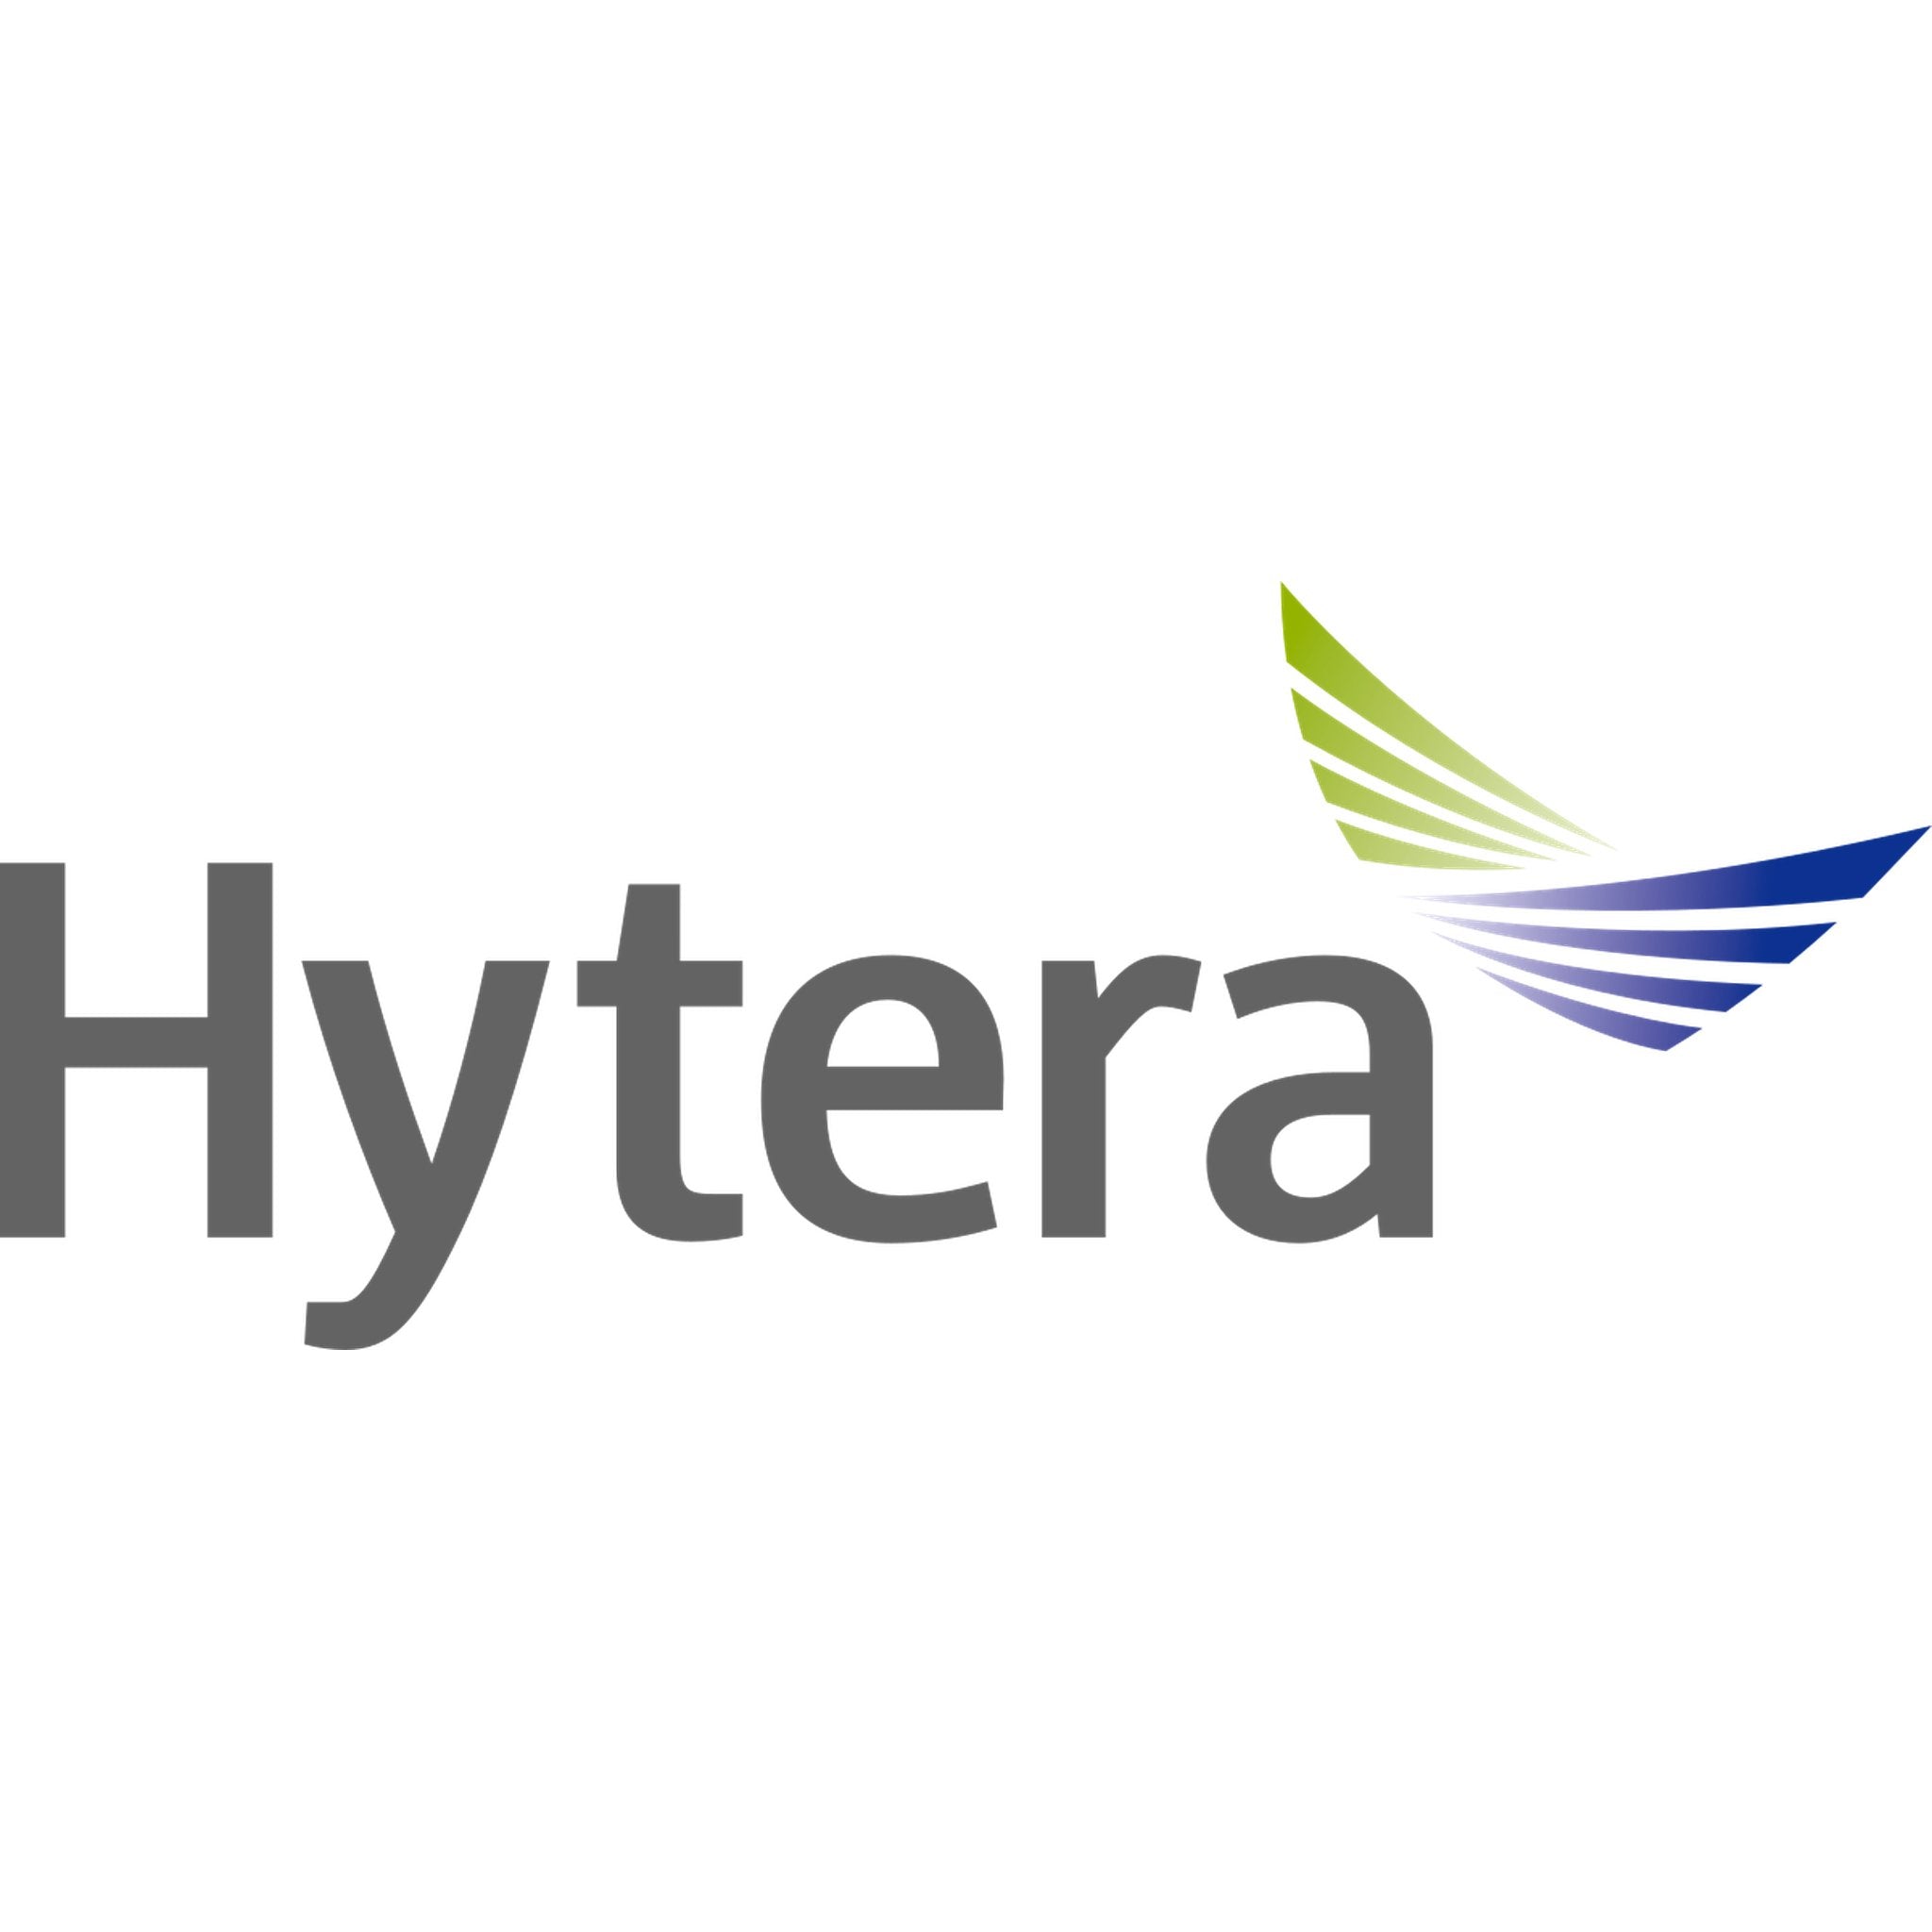 Hytera DT-13010100000032 Multi-Site XPT License (upgrade from conventional) for Repeater - Atlantic Radio Communications Corp.